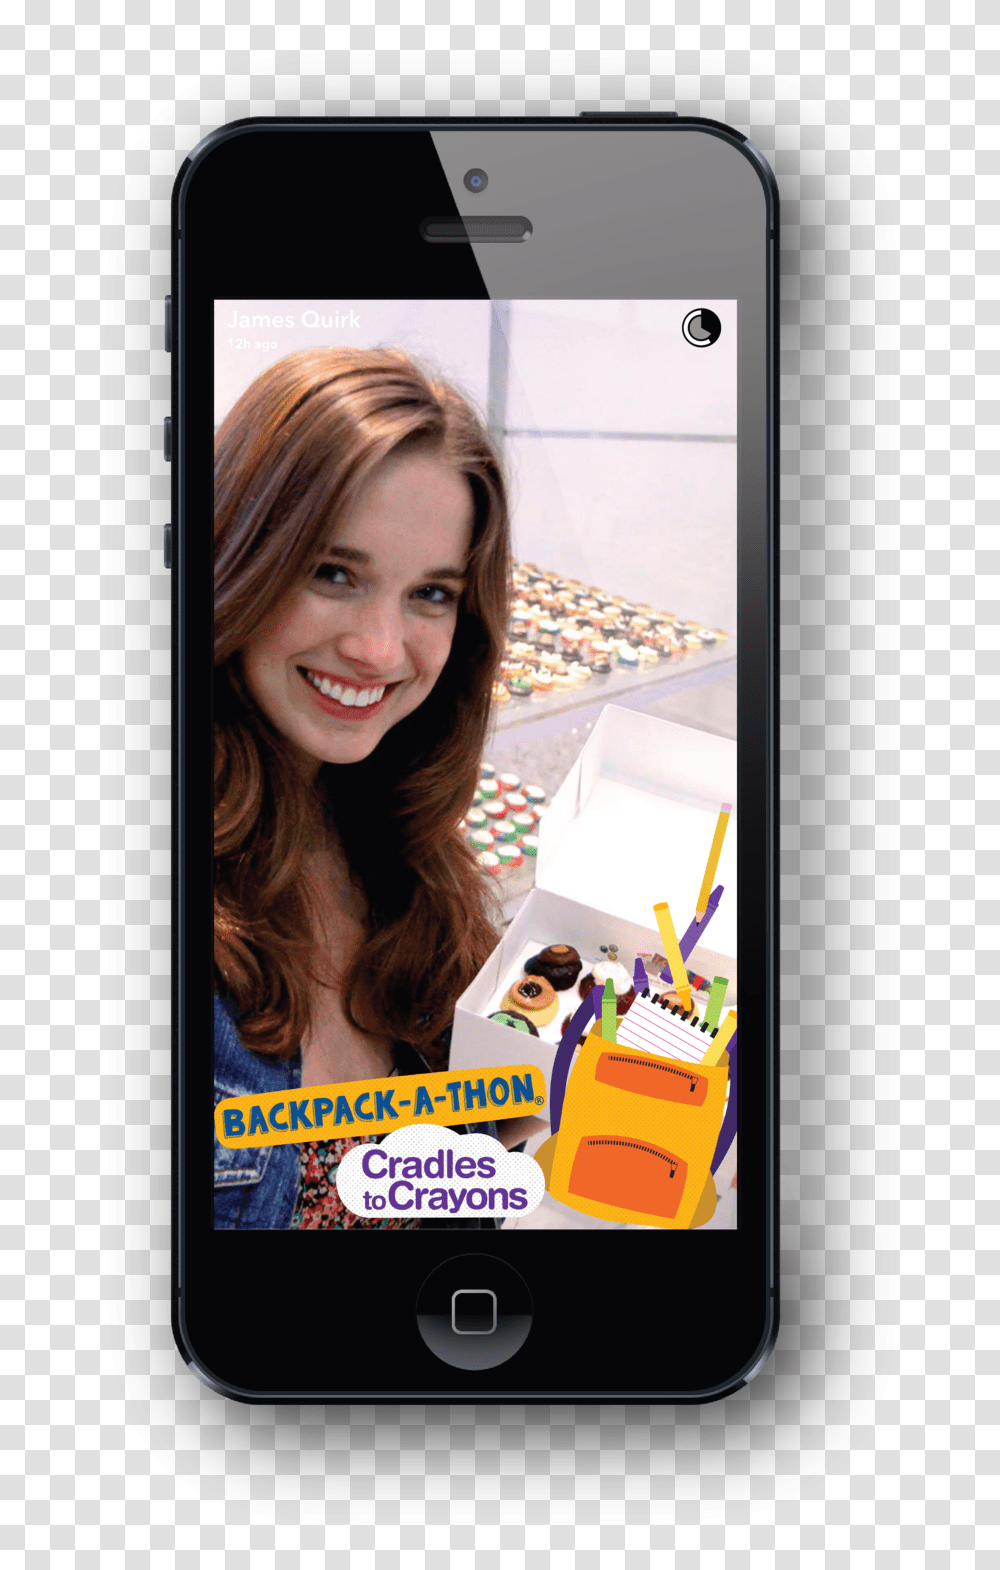 Snapchat Geofilters - James Quirk Iphone, Poster, Advertisement, Mobile Phone, Electronics Transparent Png